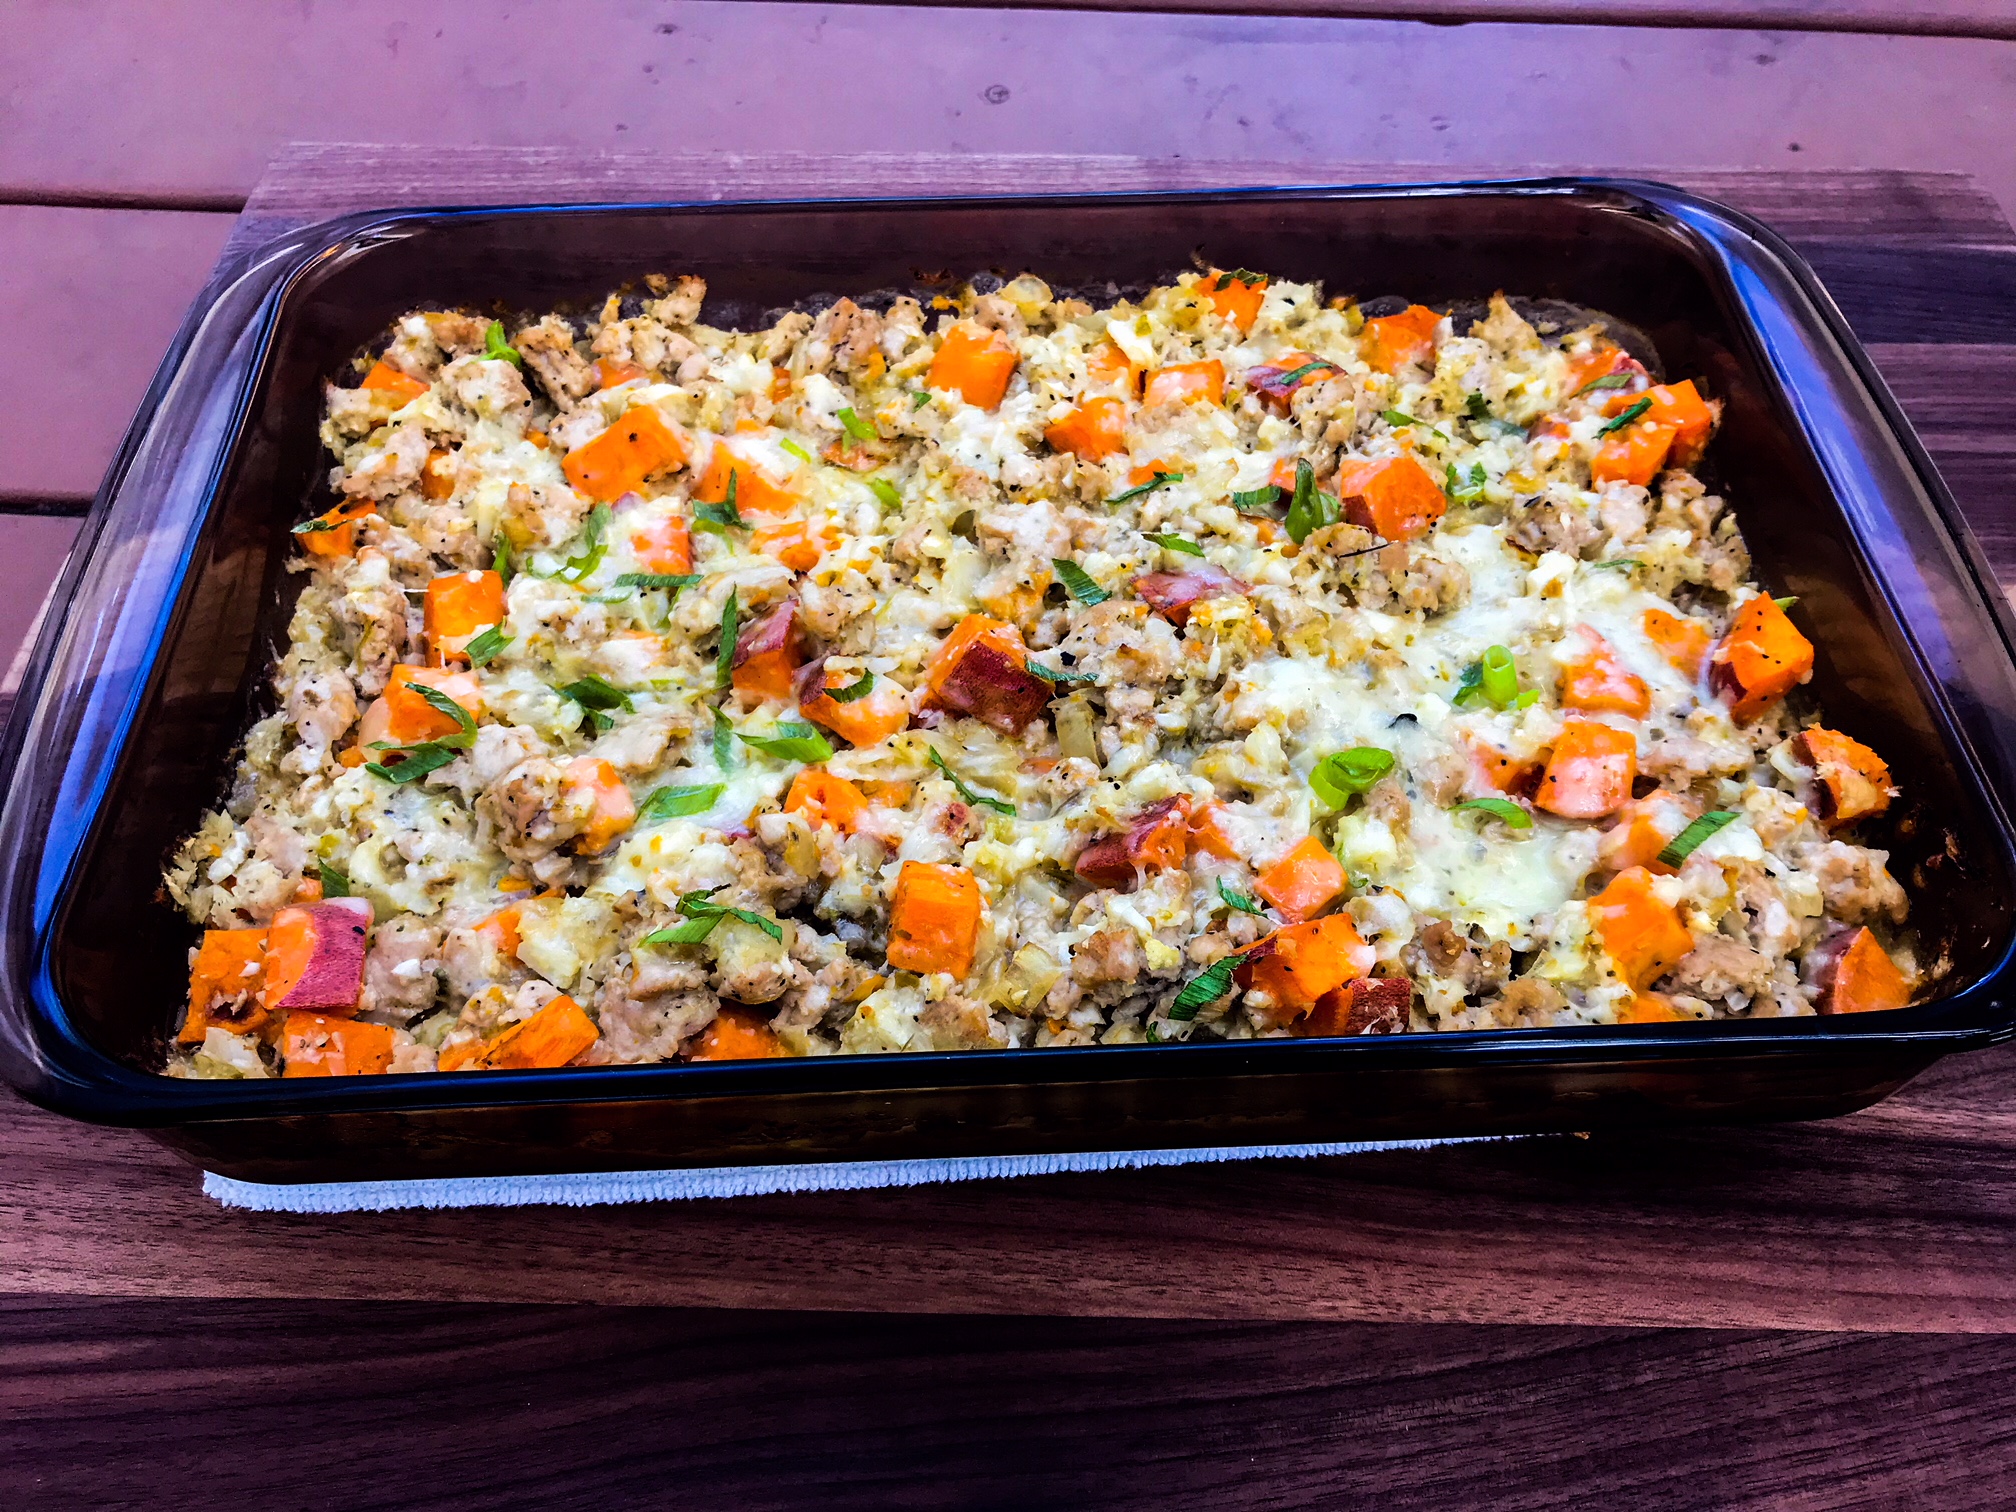 Turkey Tomatillo Casserole (with Riced Cauliflower and Sweet Potatoes)